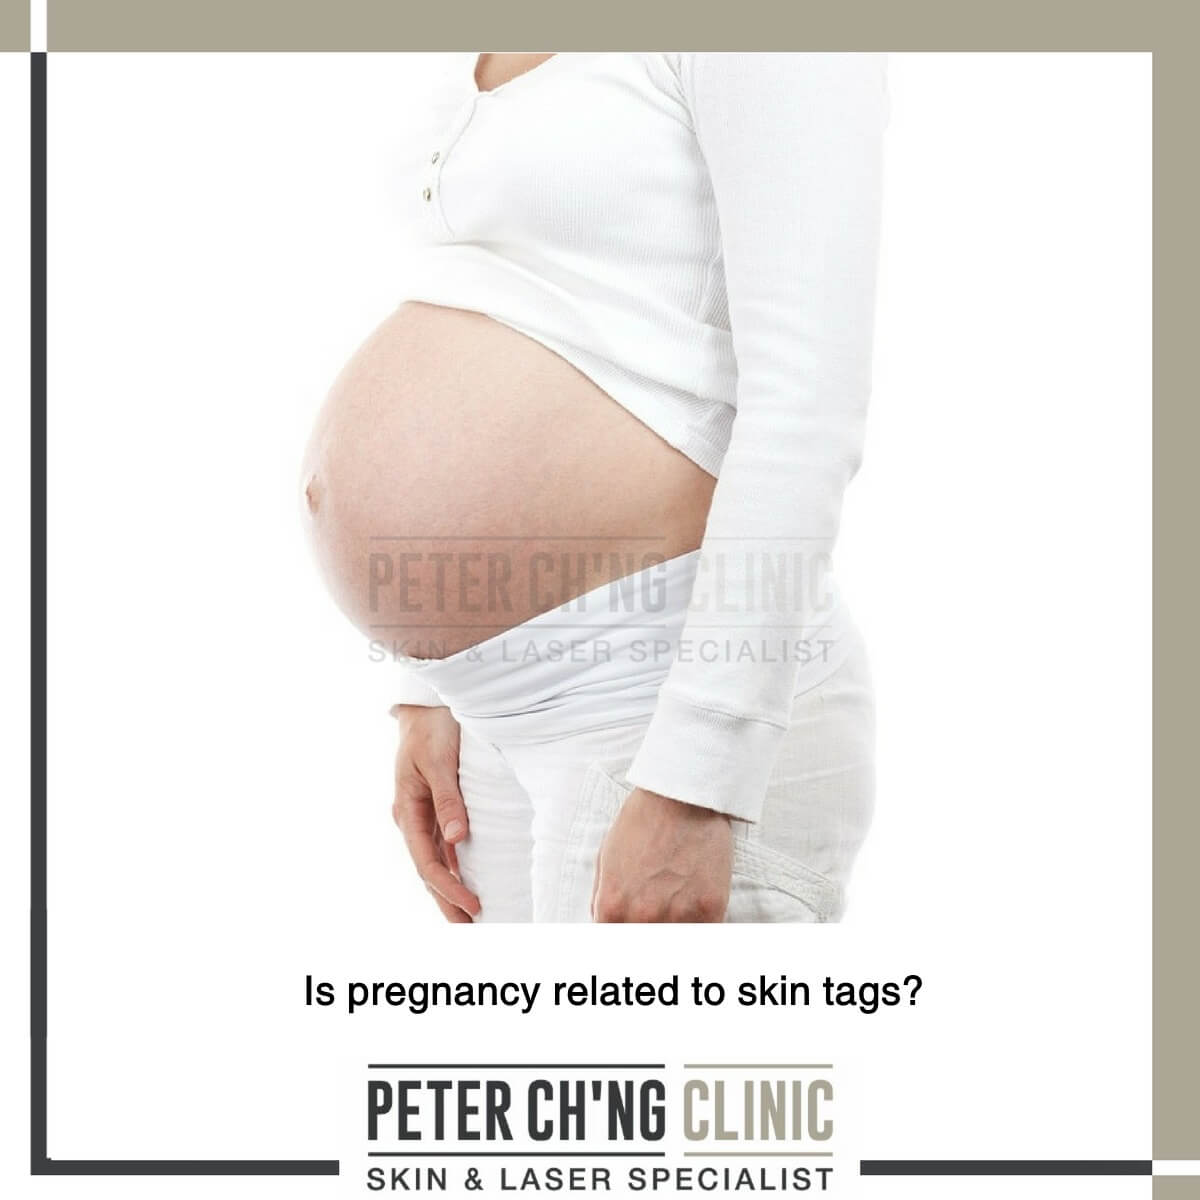 Pregnancy and skin tags